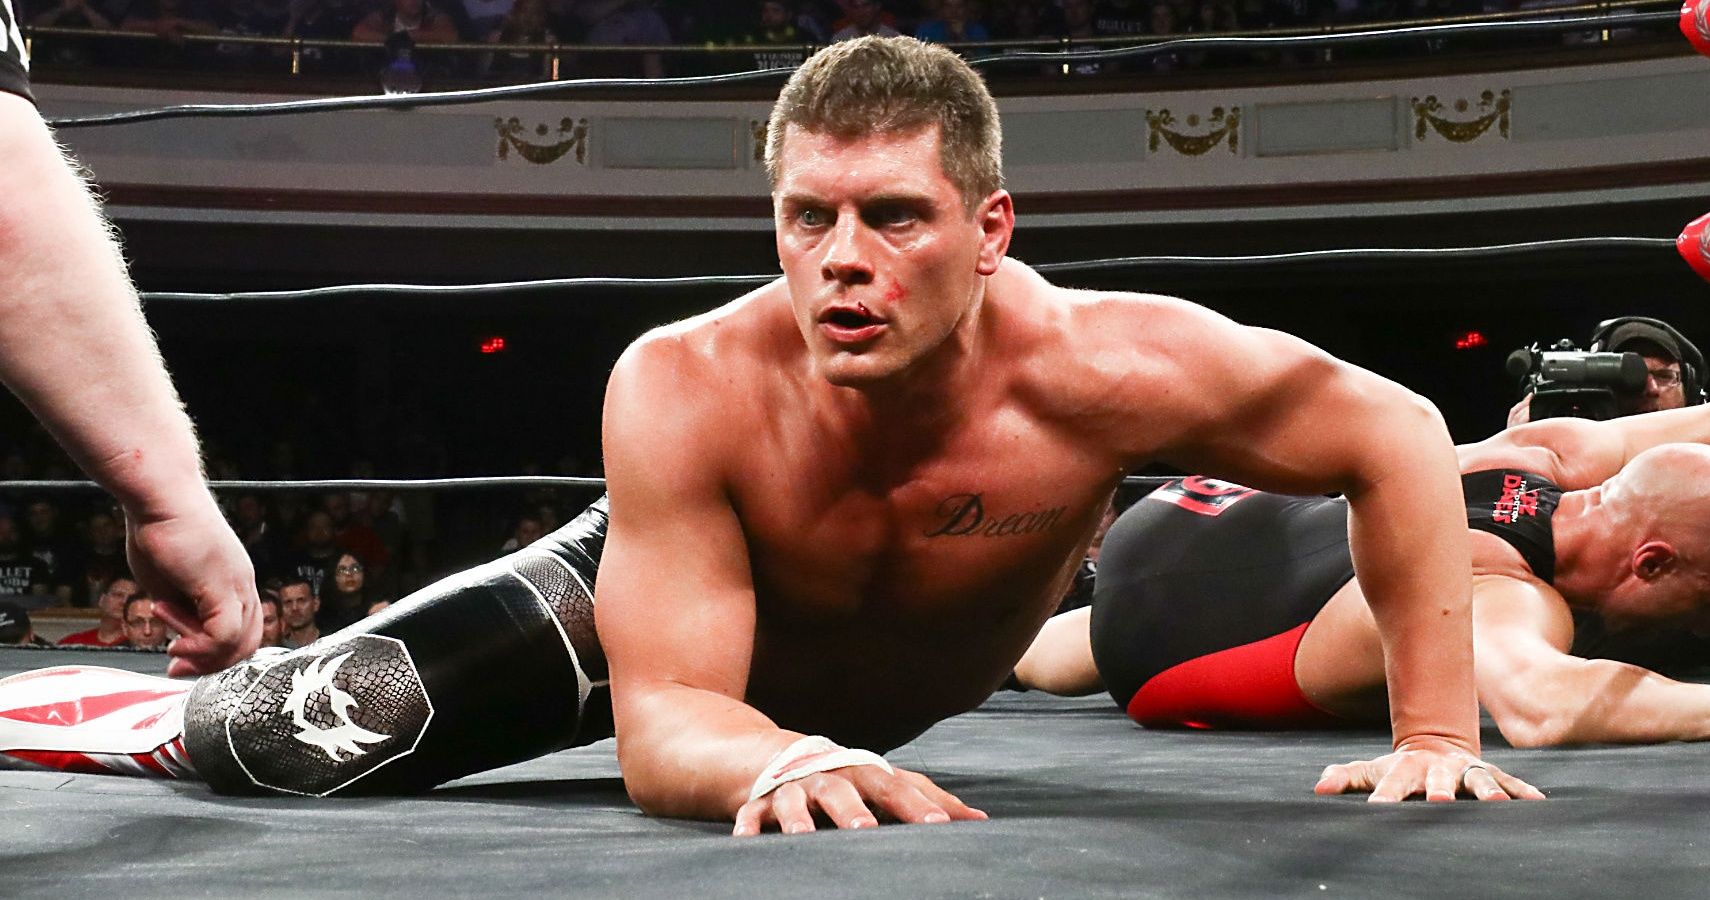 10 Wrestlers You Didn't Know Cody Rhodes Faced.